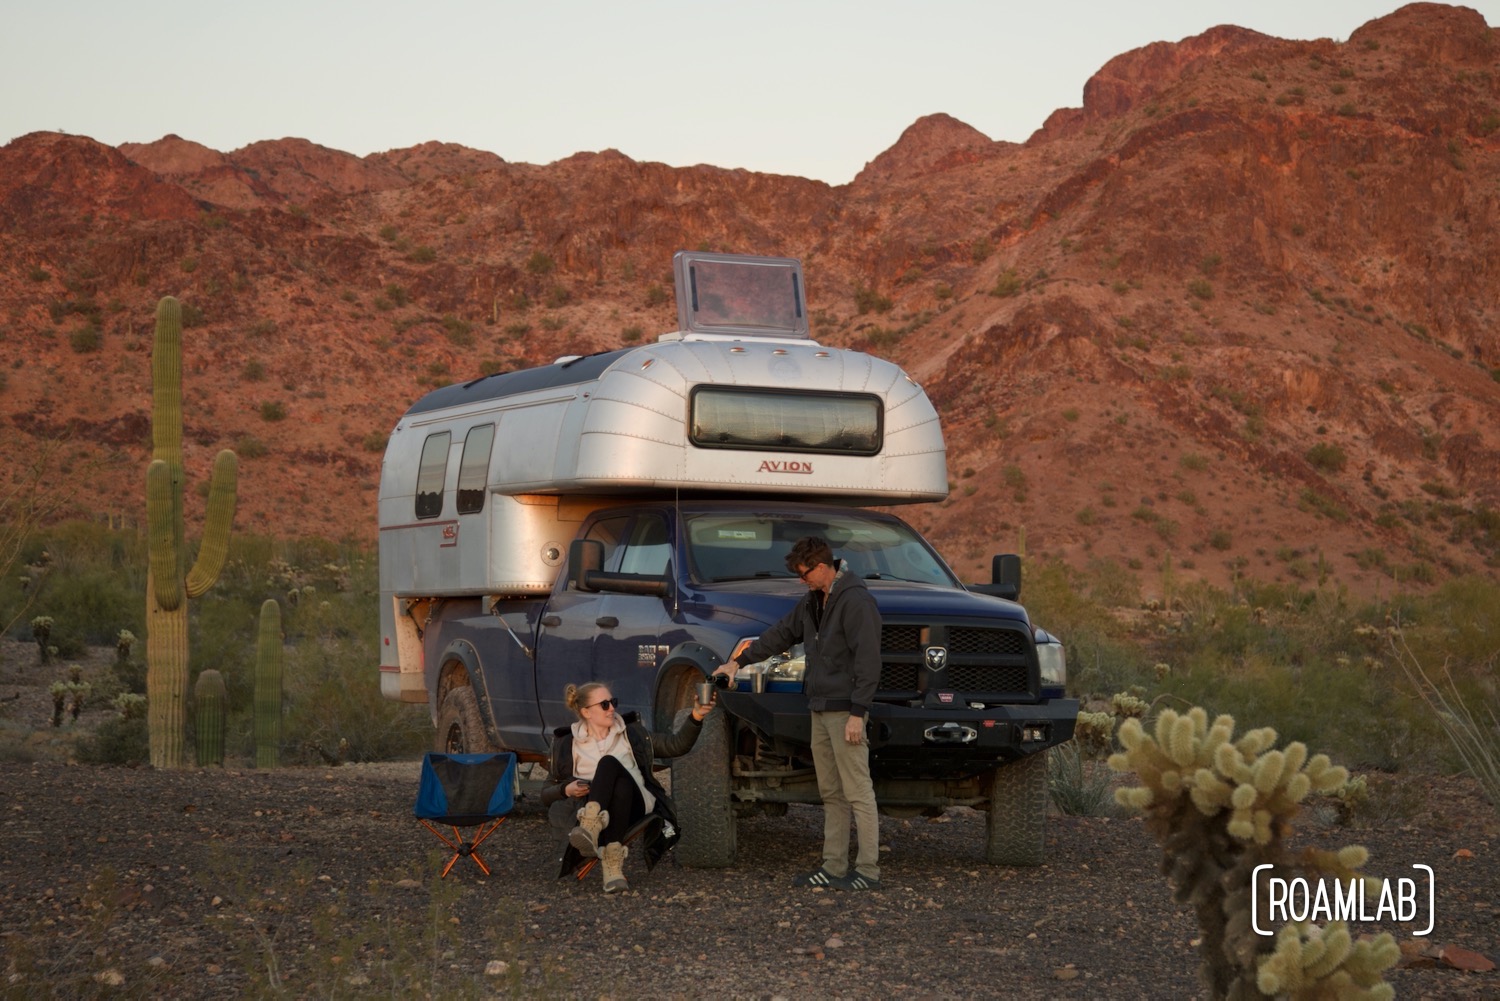 Couple sharing a bottle of beer, seated in front of a truck camper in Kofa Wilderness Refuge.